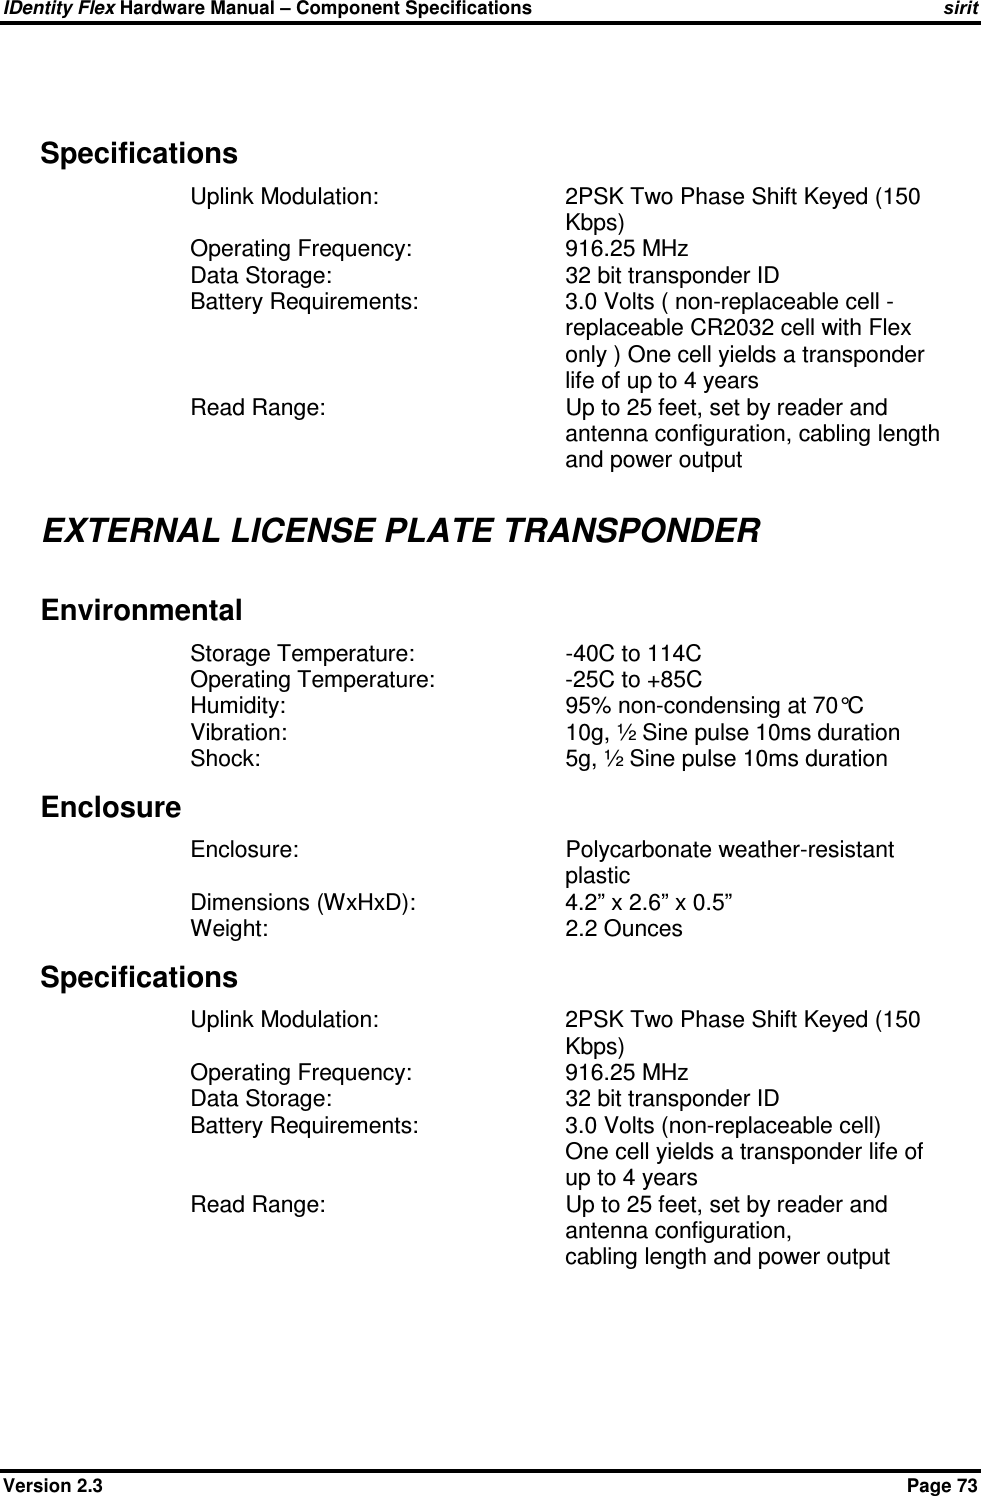 IDentity Flex Hardware Manual – Component Specifications sirit Version 2.3    Page 73  Specifications Uplink Modulation:  2PSK Two Phase Shift Keyed (150 Kbps) Operating Frequency:     916.25 MHz Data Storage:       32 bit transponder ID Battery Requirements:  3.0 Volts ( non-replaceable cell -replaceable CR2032 cell with Flex only ) One cell yields a transponder life of up to 4 years Read Range:  Up to 25 feet, set by reader and antenna configuration, cabling length and power output  EXTERNAL LICENSE PLATE TRANSPONDER Environmental Storage Temperature:     -40C to 114C Operating Temperature:    -25C to +85C Humidity:        95% non-condensing at 70°C Vibration:        10g, ½ Sine pulse 10ms duration Shock:         5g, ½ Sine pulse 10ms duration Enclosure Enclosure:  Polycarbonate weather-resistant plastic Dimensions (WxHxD):    4.2” x 2.6” x 0.5” Weight:        2.2 Ounces Specifications Uplink Modulation:  2PSK Two Phase Shift Keyed (150 Kbps) Operating Frequency:     916.25 MHz Data Storage:       32 bit transponder ID Battery Requirements:    3.0 Volts (non-replaceable cell) One cell yields a transponder life of up to 4 years Read Range:  Up to 25 feet, set by reader and antenna configuration,  cabling length and power output